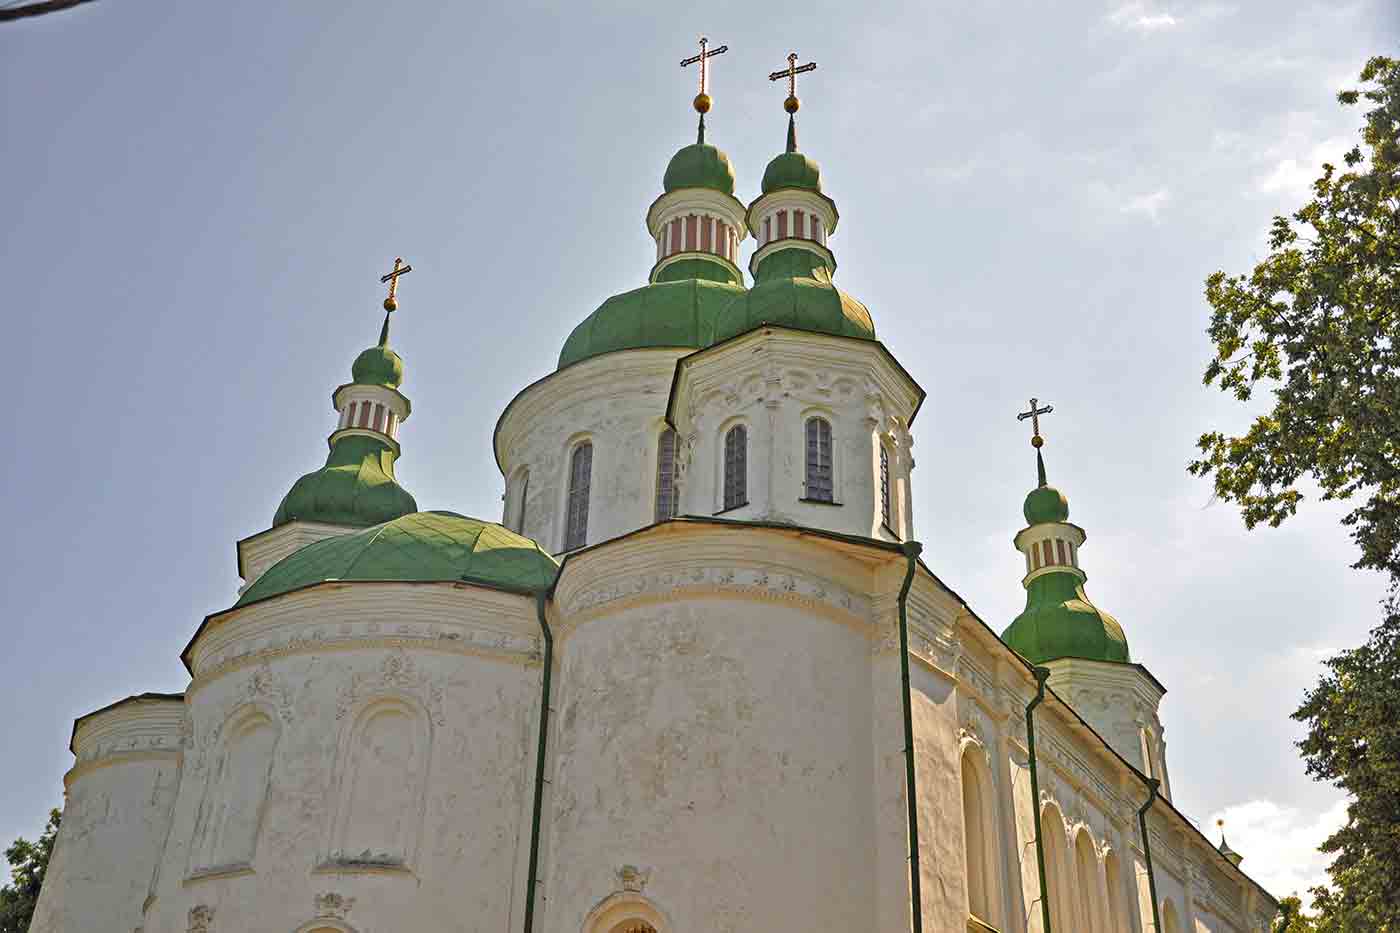 St. Cyril’s Monastery